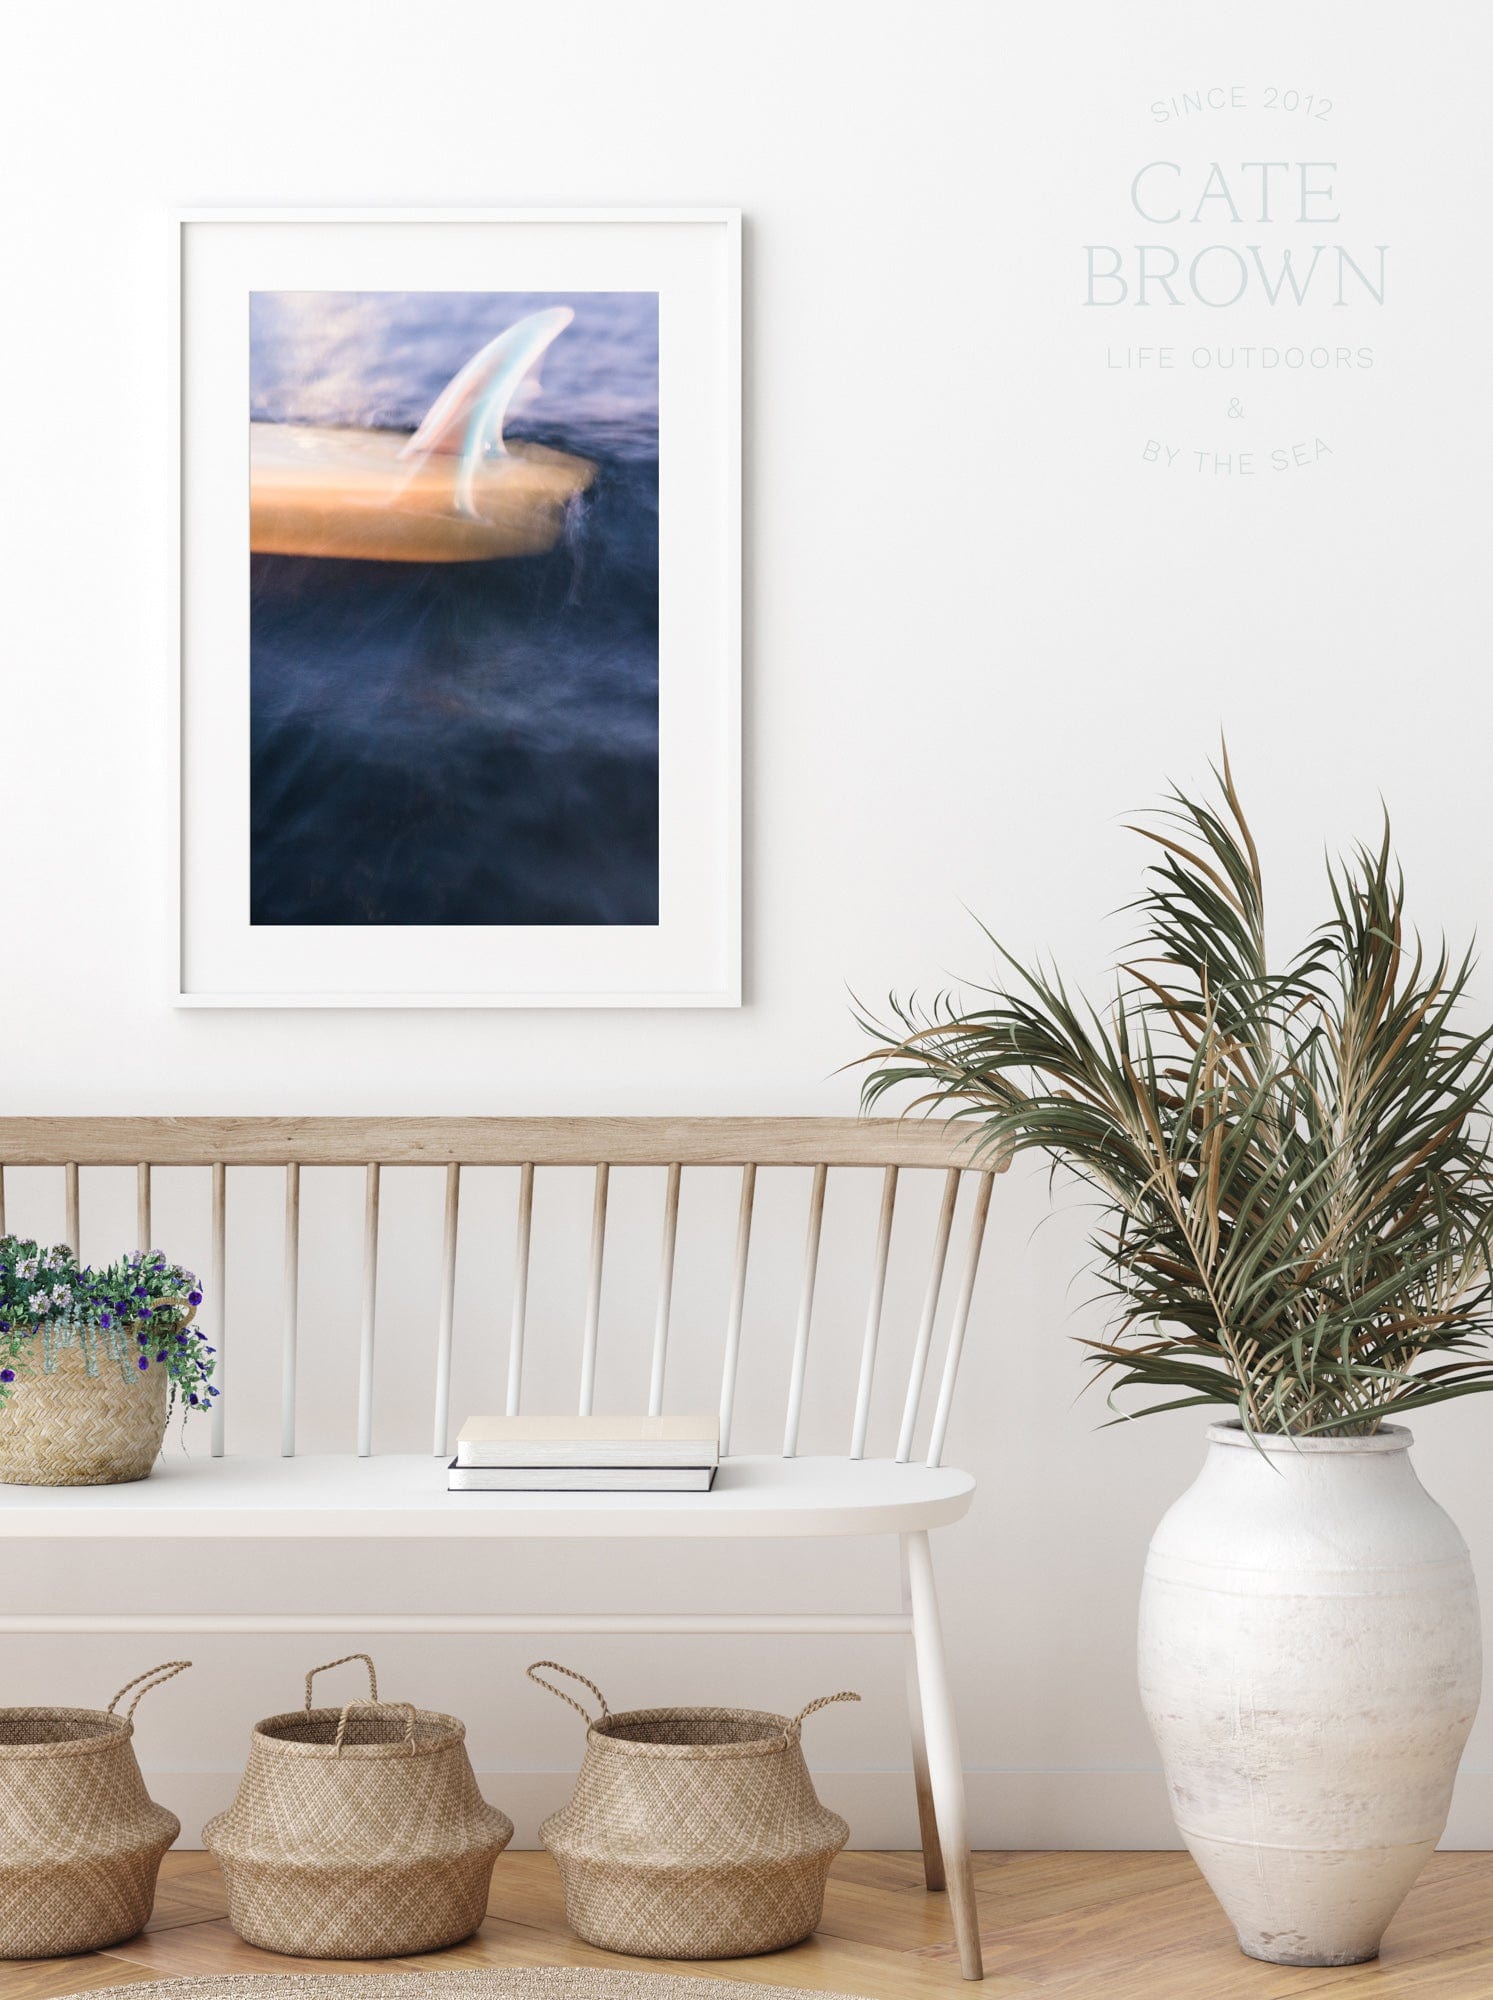 Cate Brown Photo Fine Art Print / 8"x12" / White Single Fins  //  Surf Photography Made to Order Ocean Fine Art